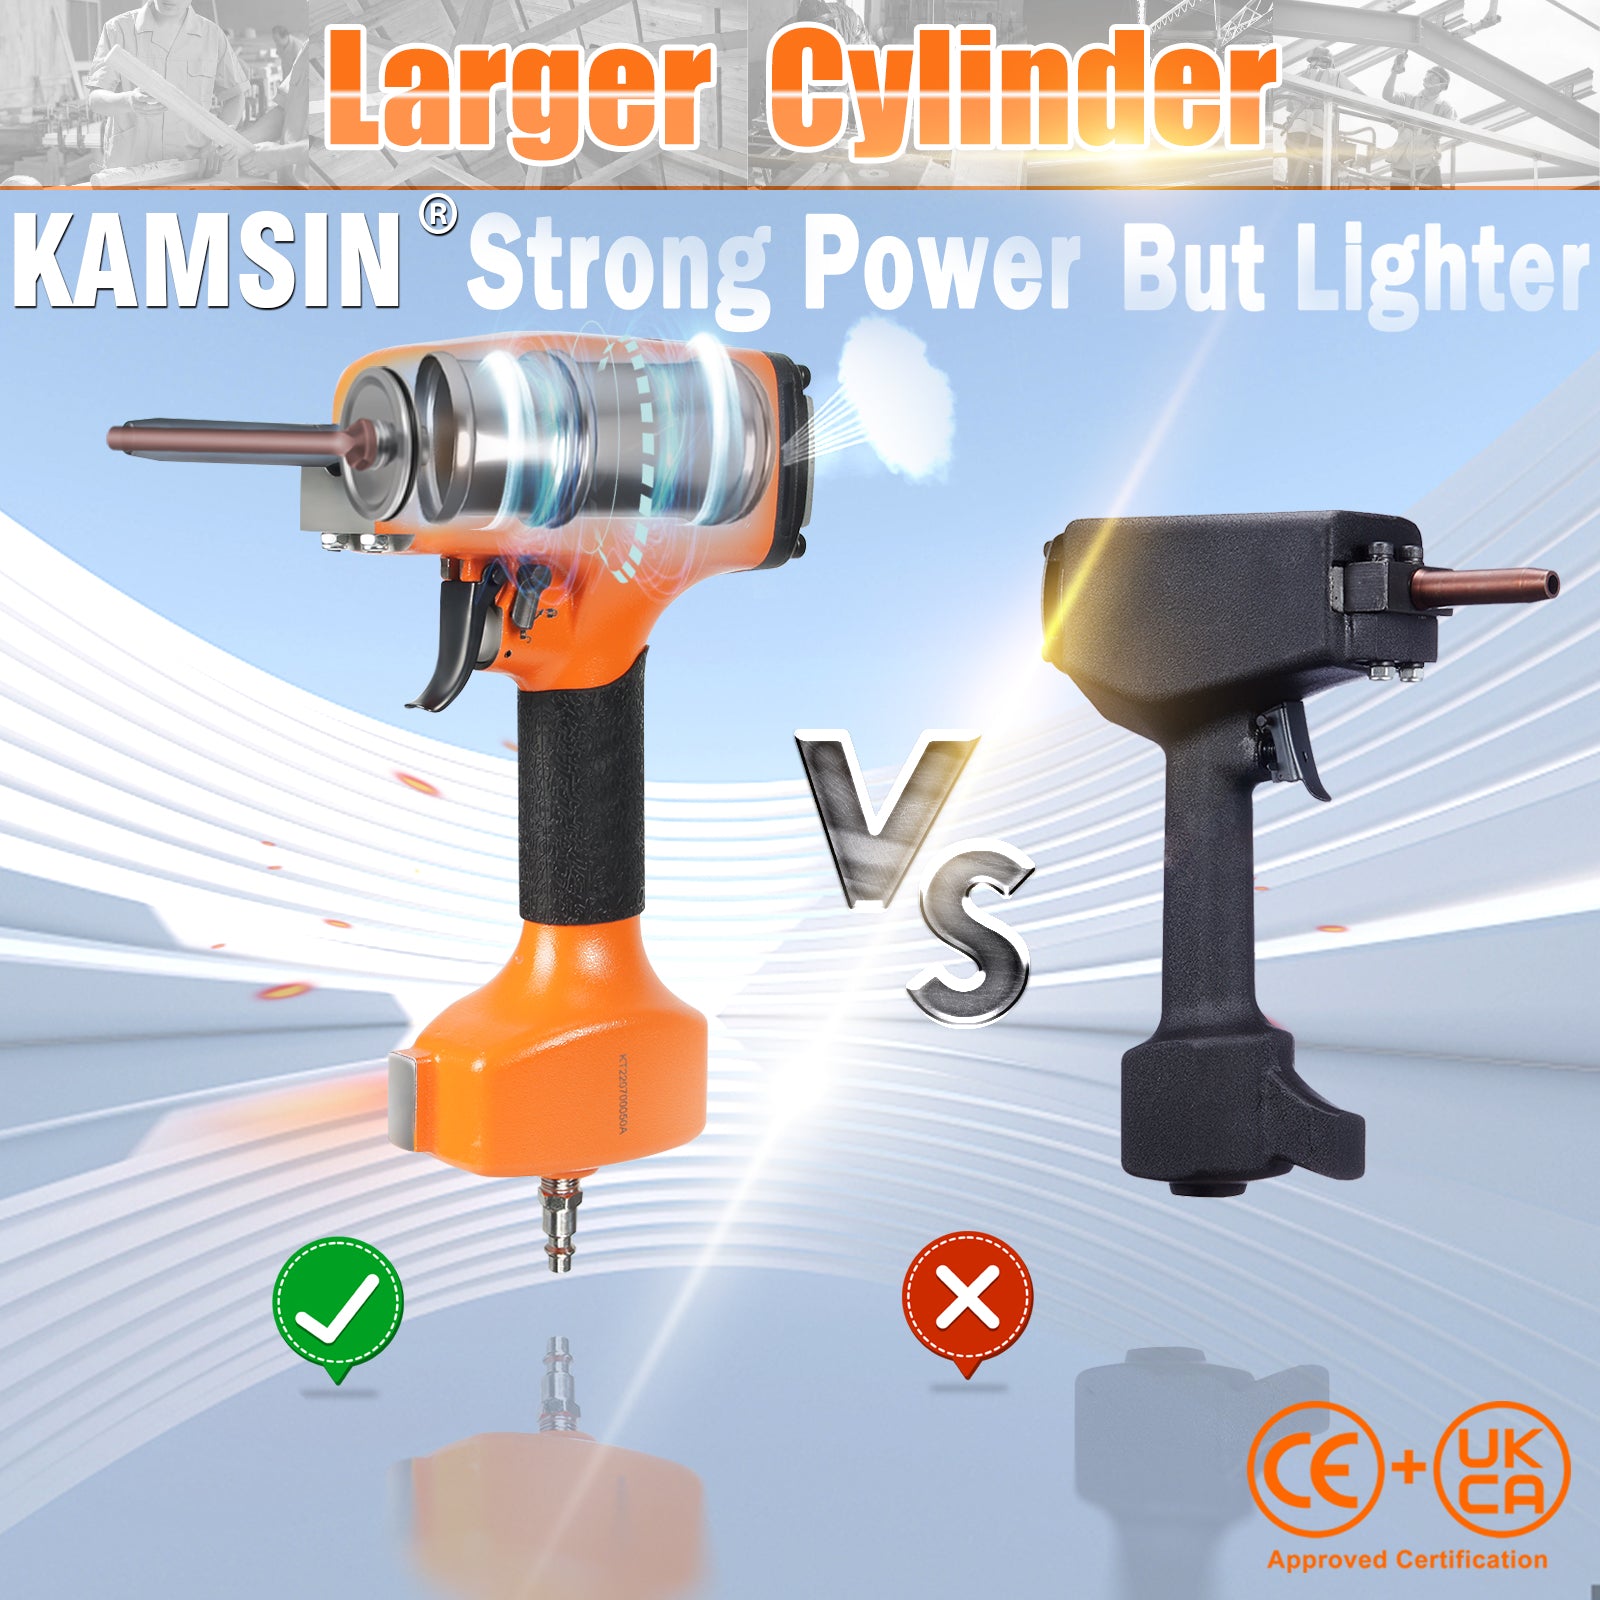 KAMSIN KT50 Pneumatic Nail Puller with safety, Air Nails Remover Gun,Punch Nails head diameter of 3-6mm (0.118